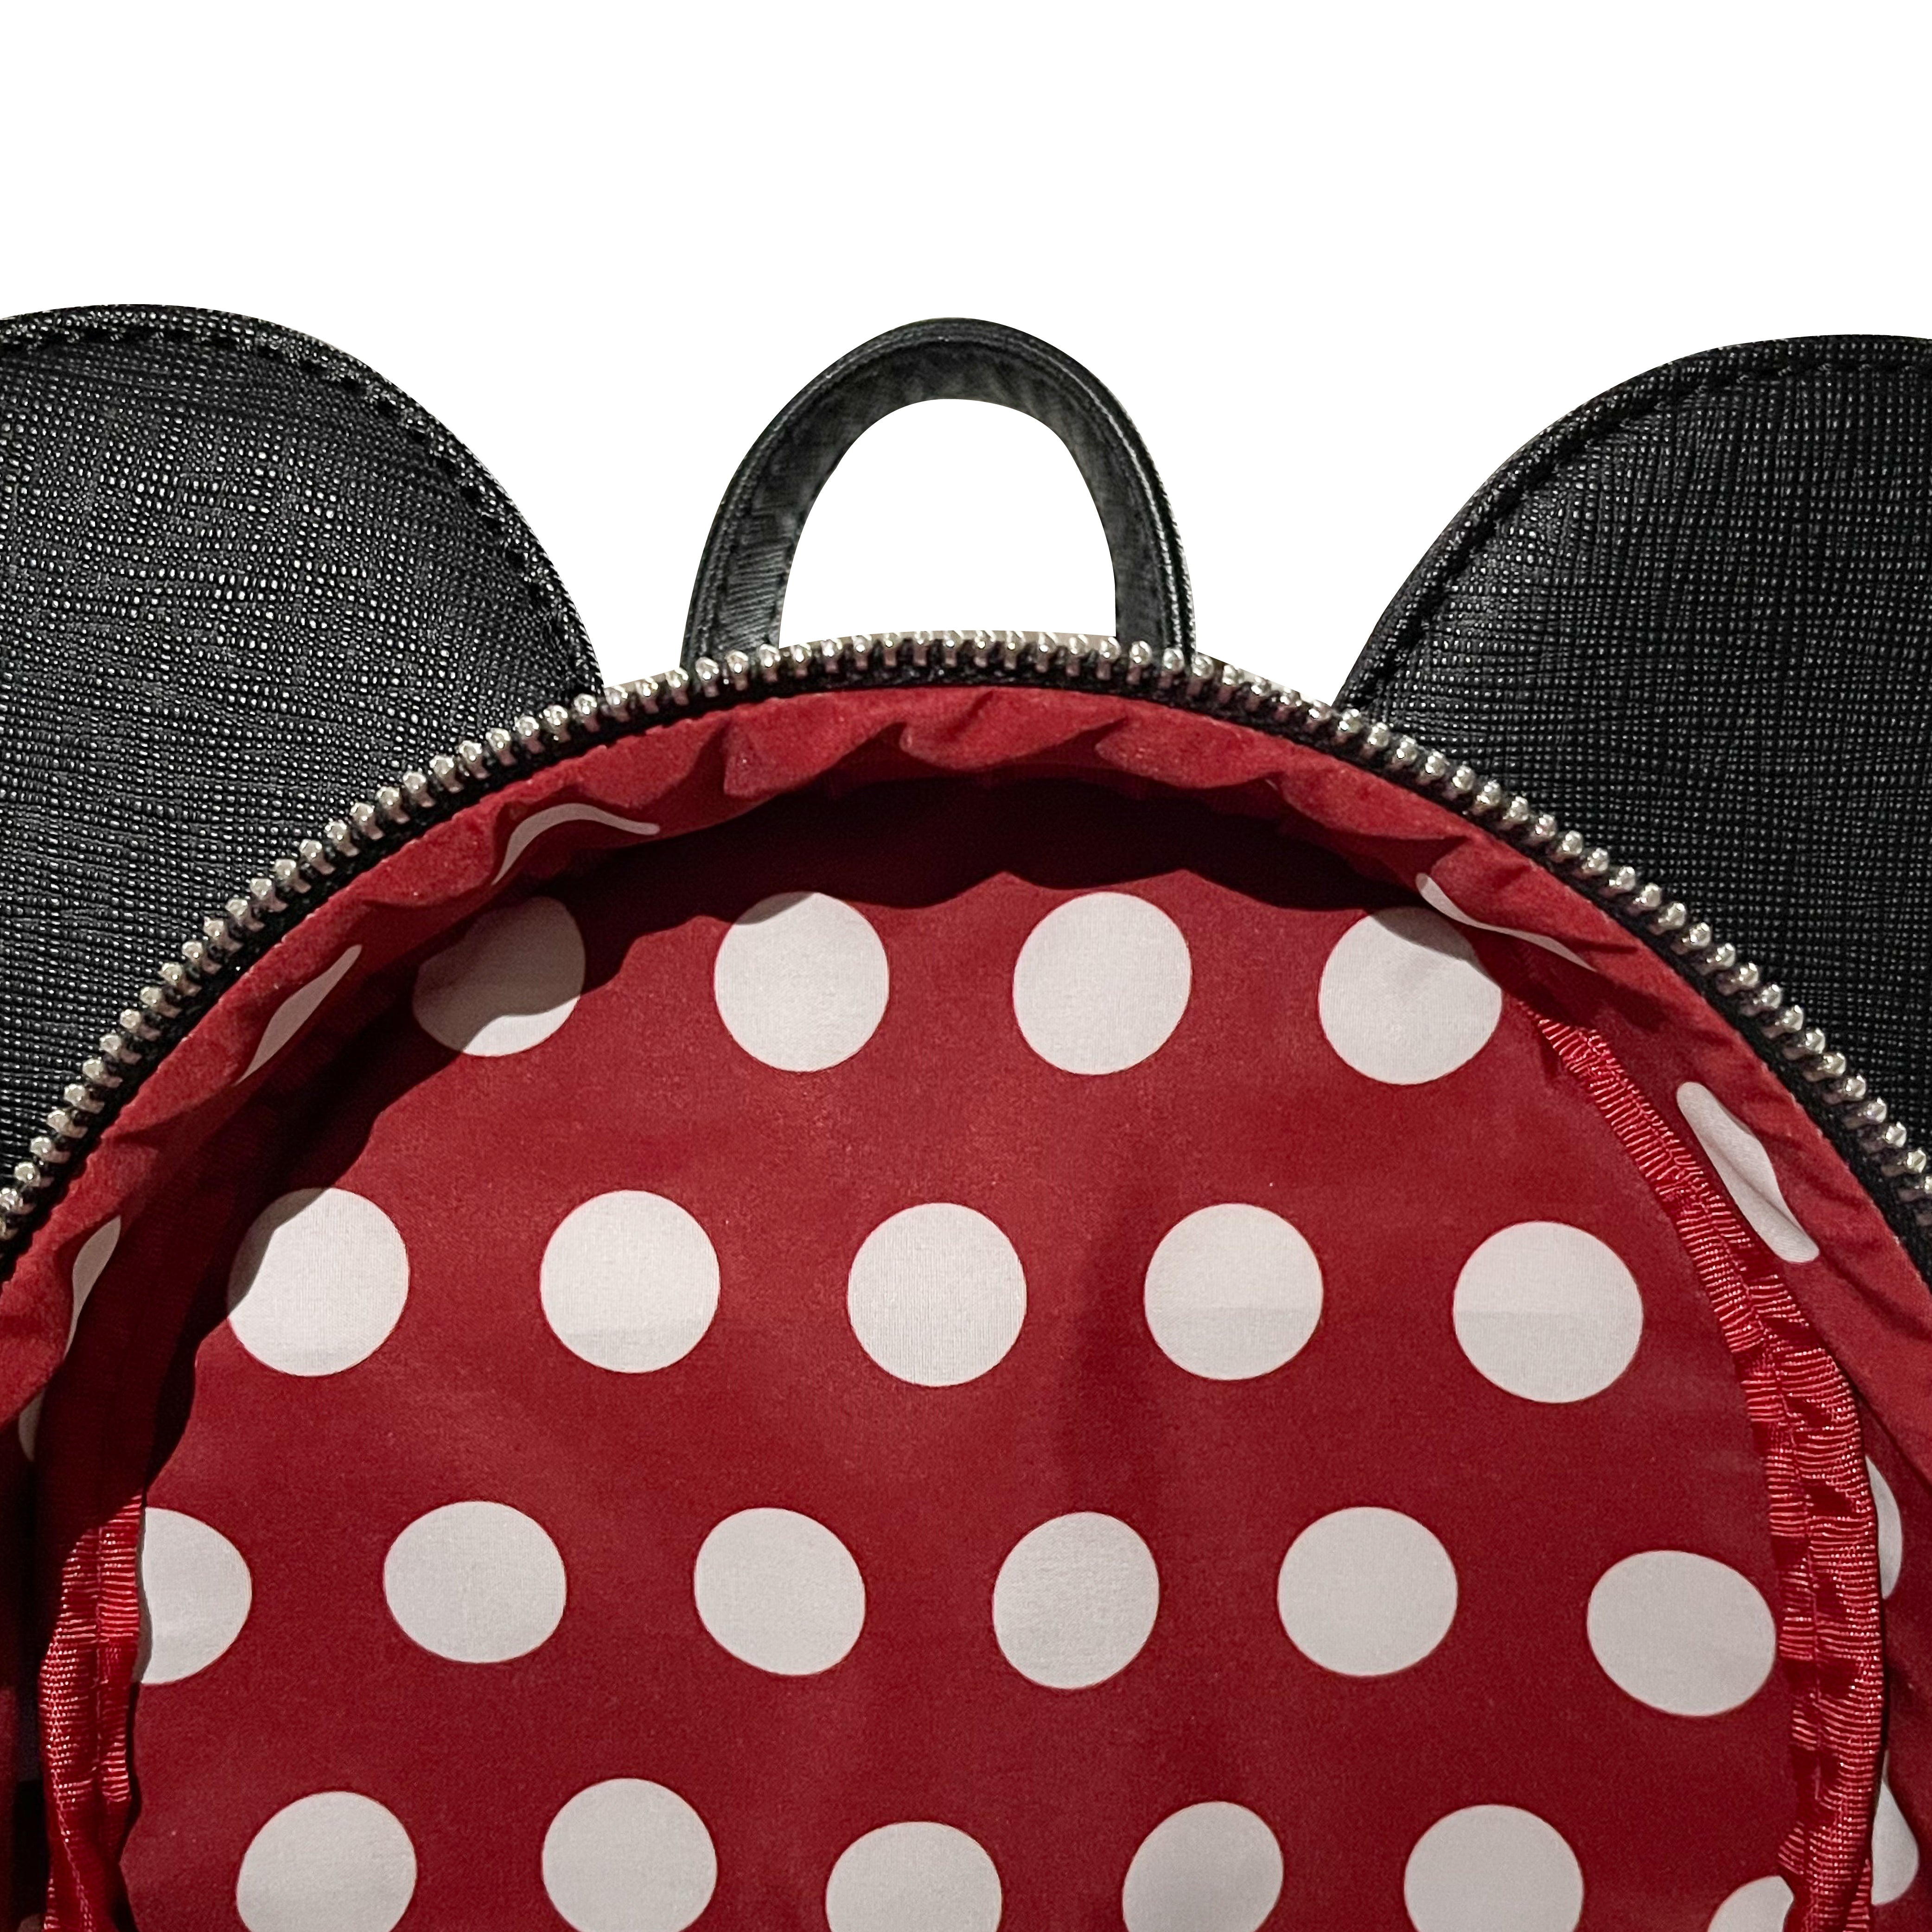 Disney Minnie Mouse Backpack – Pit-a-Pats.com